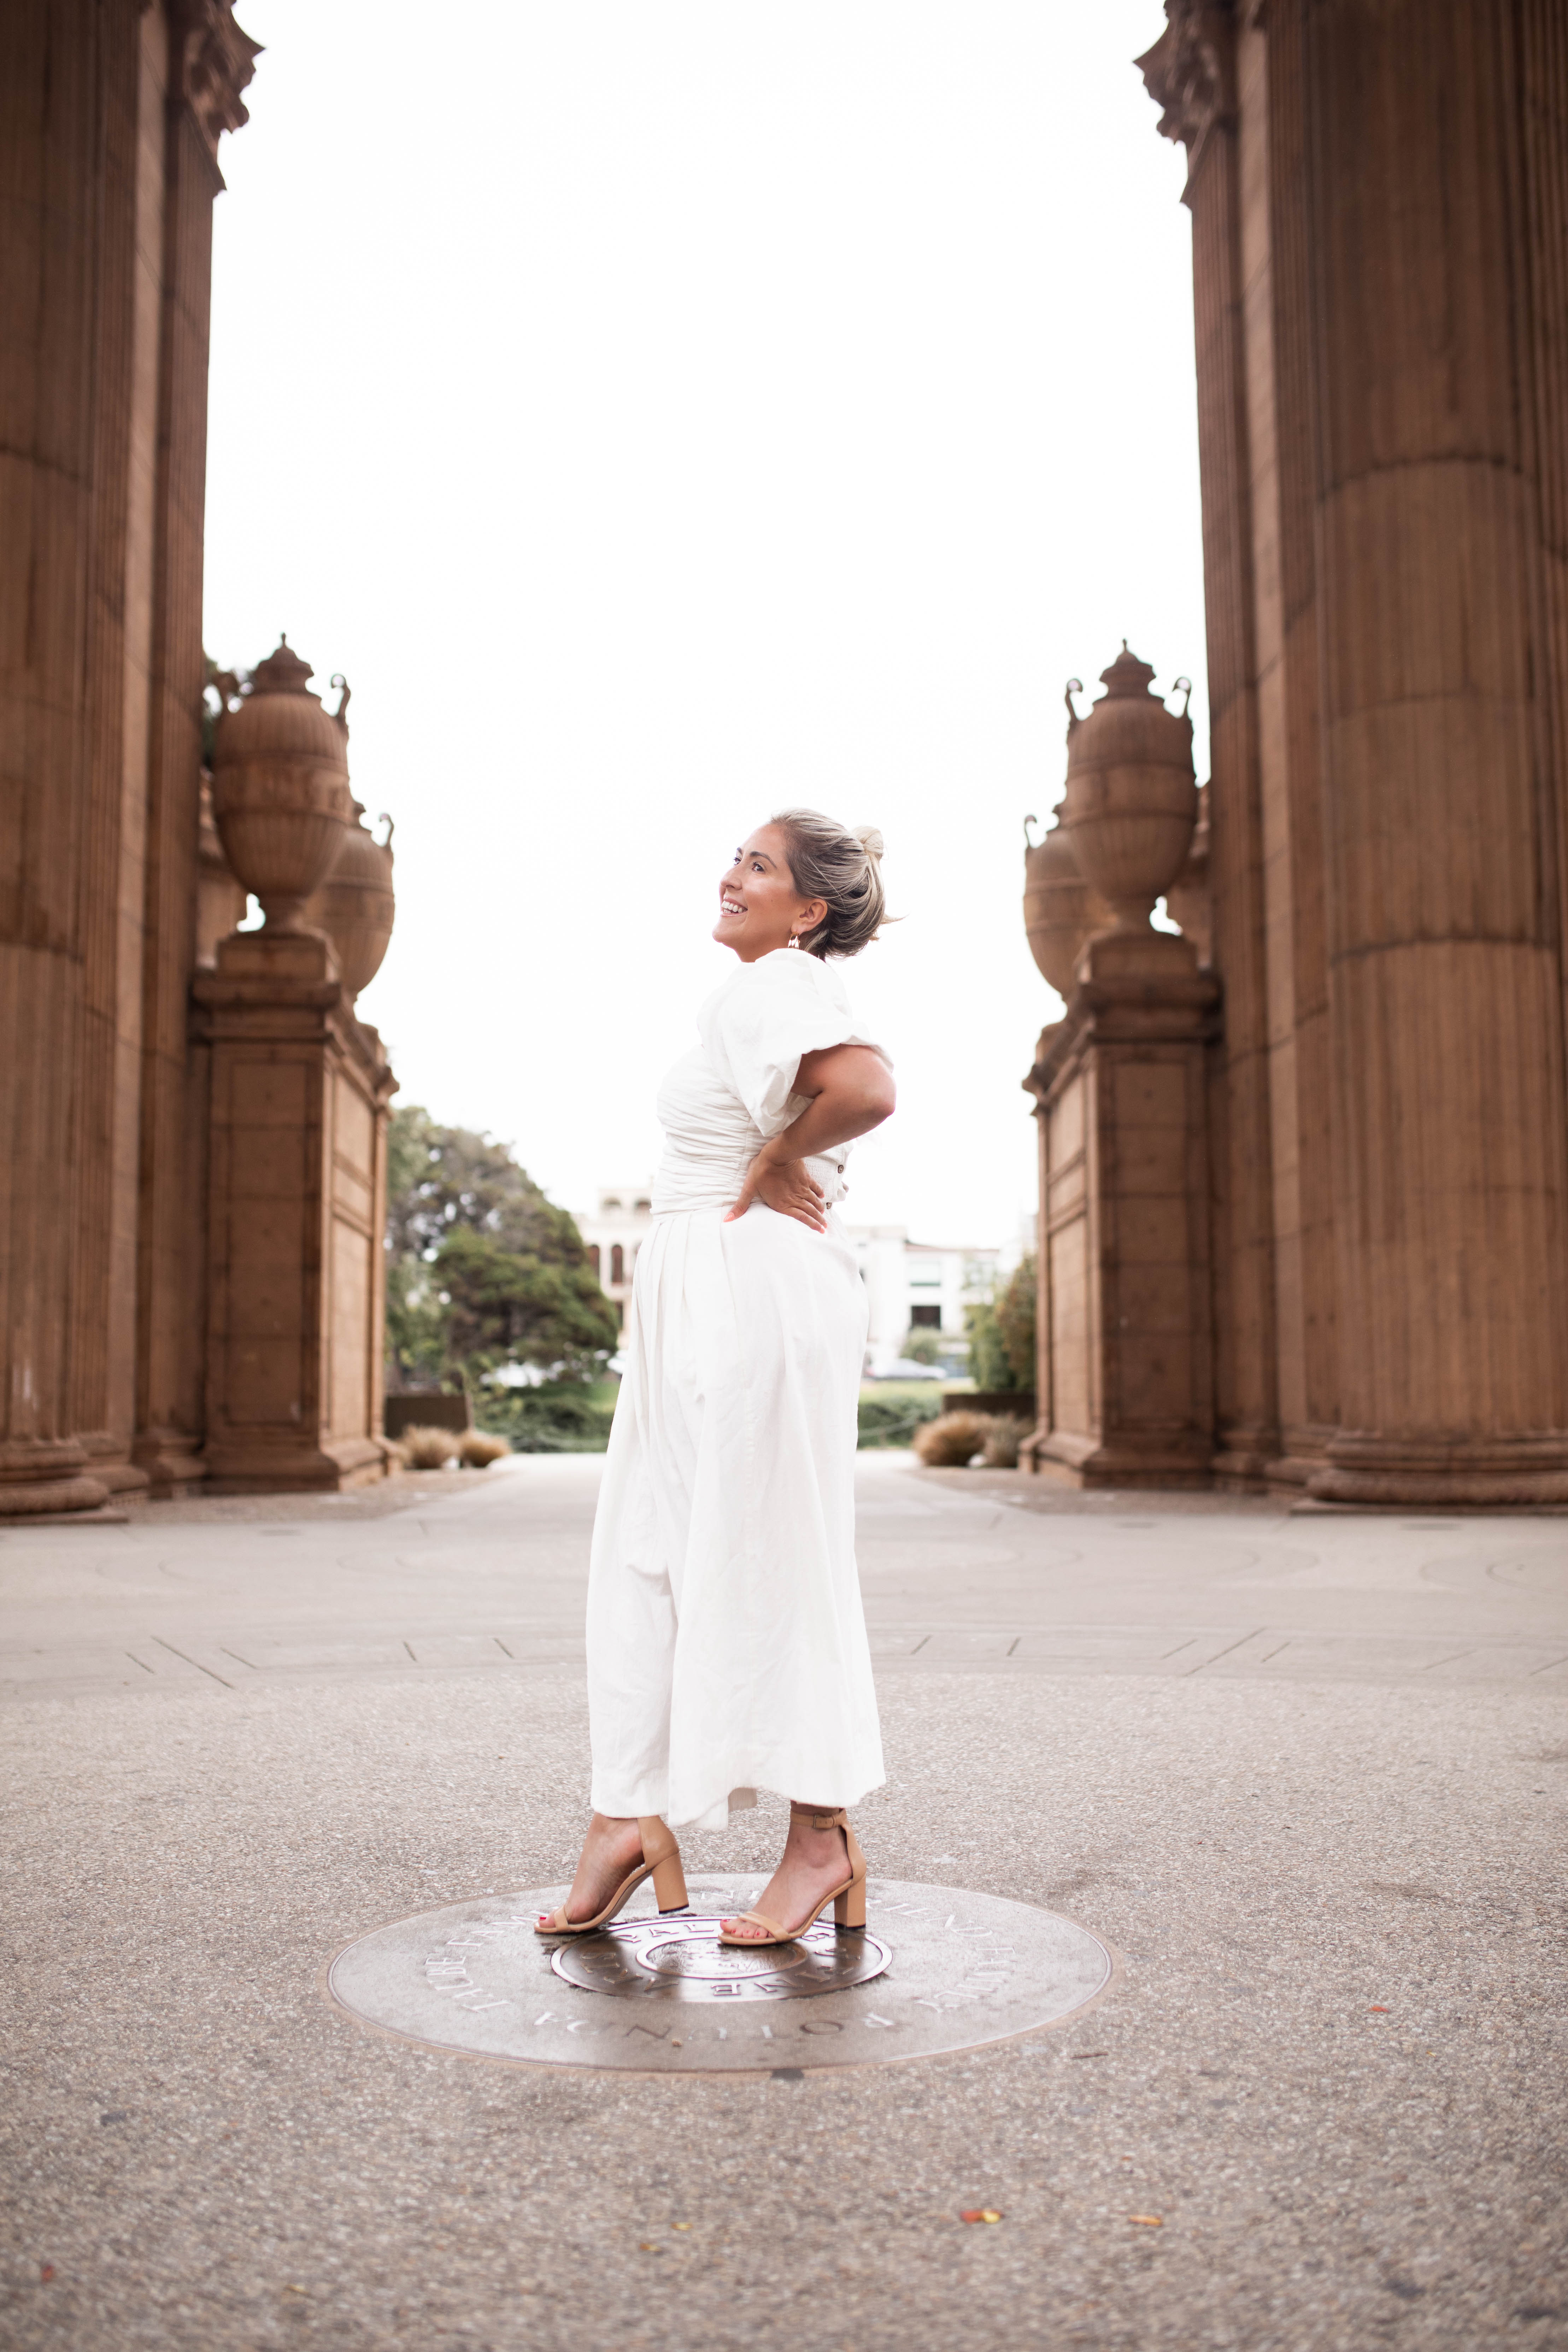 KatWalkSF wearing the Free People Ruched Dress at the Palace of Fine Arts.